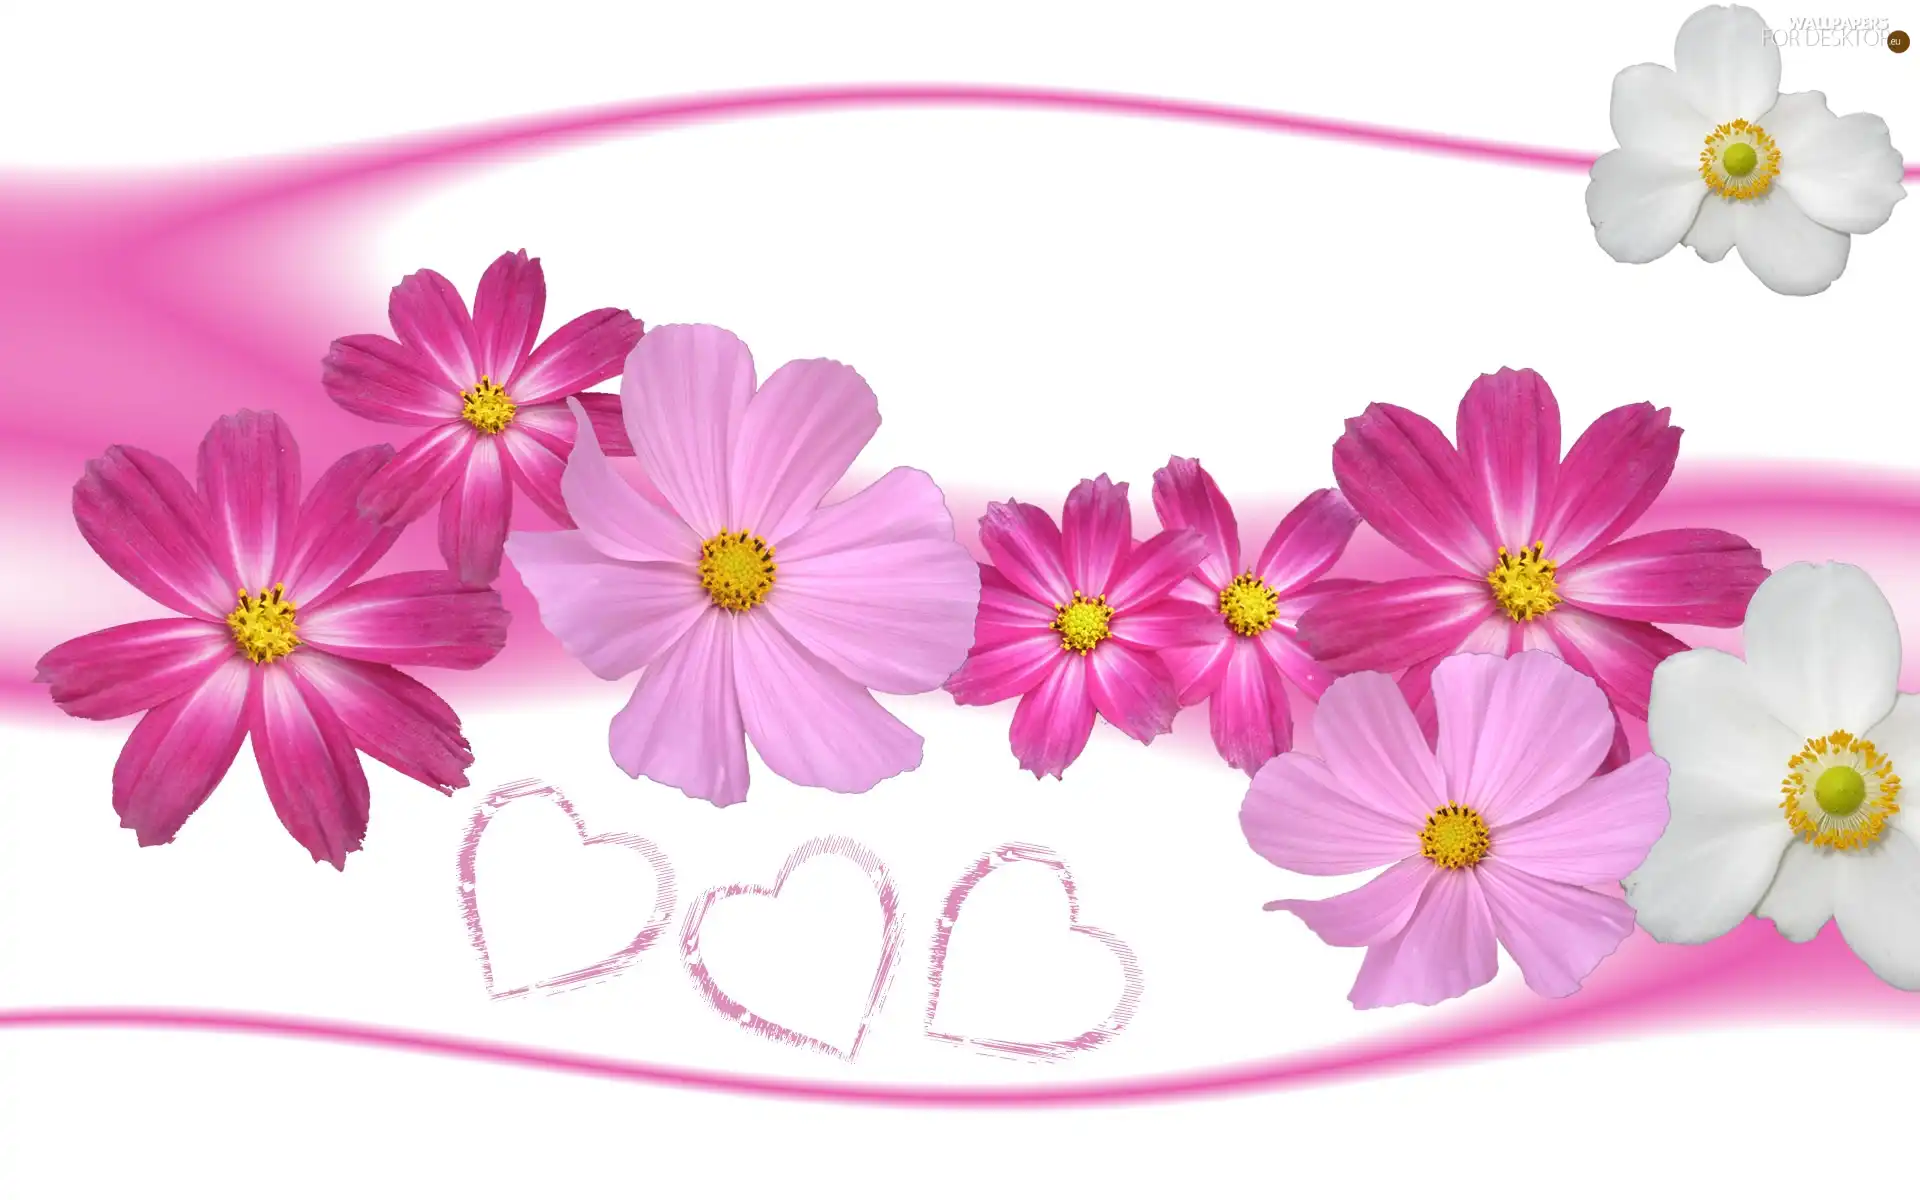 Heart, Love things, White, Flowers, Pink